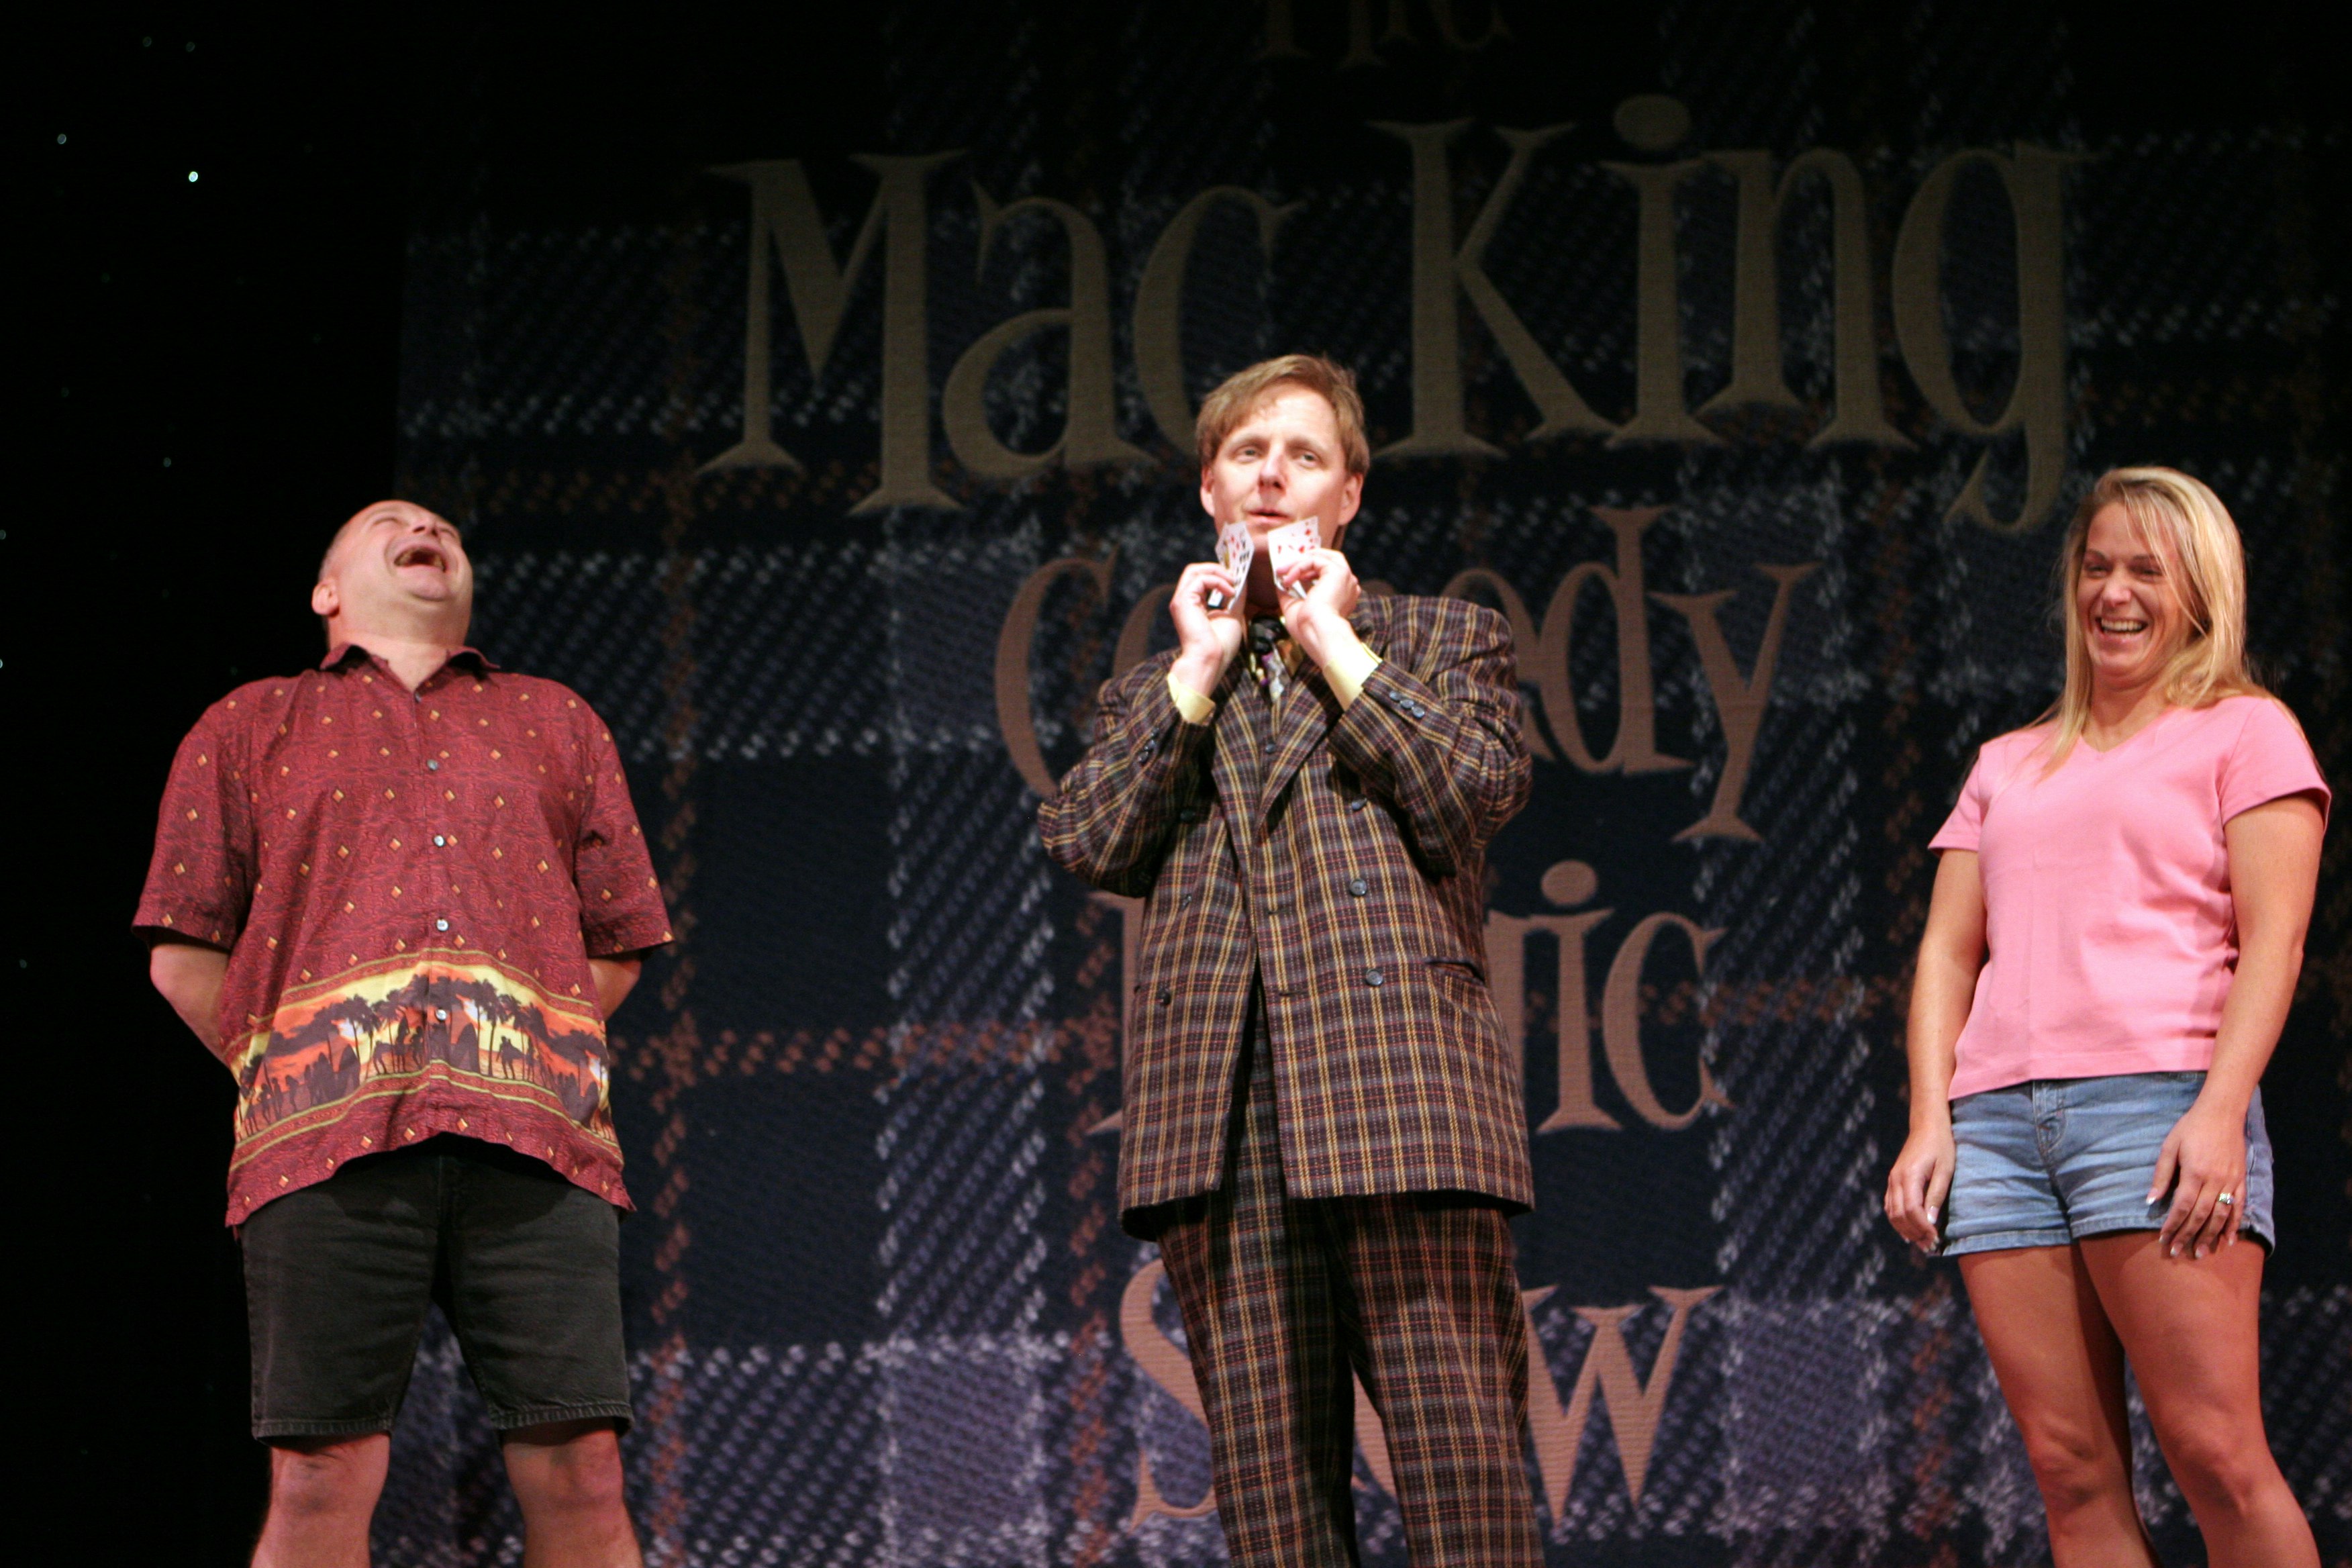 Magician and comedian Mac King performs a card trick on stage at Harrah's in Las Vegas, while a man and a woman stand either side of him, laughing.